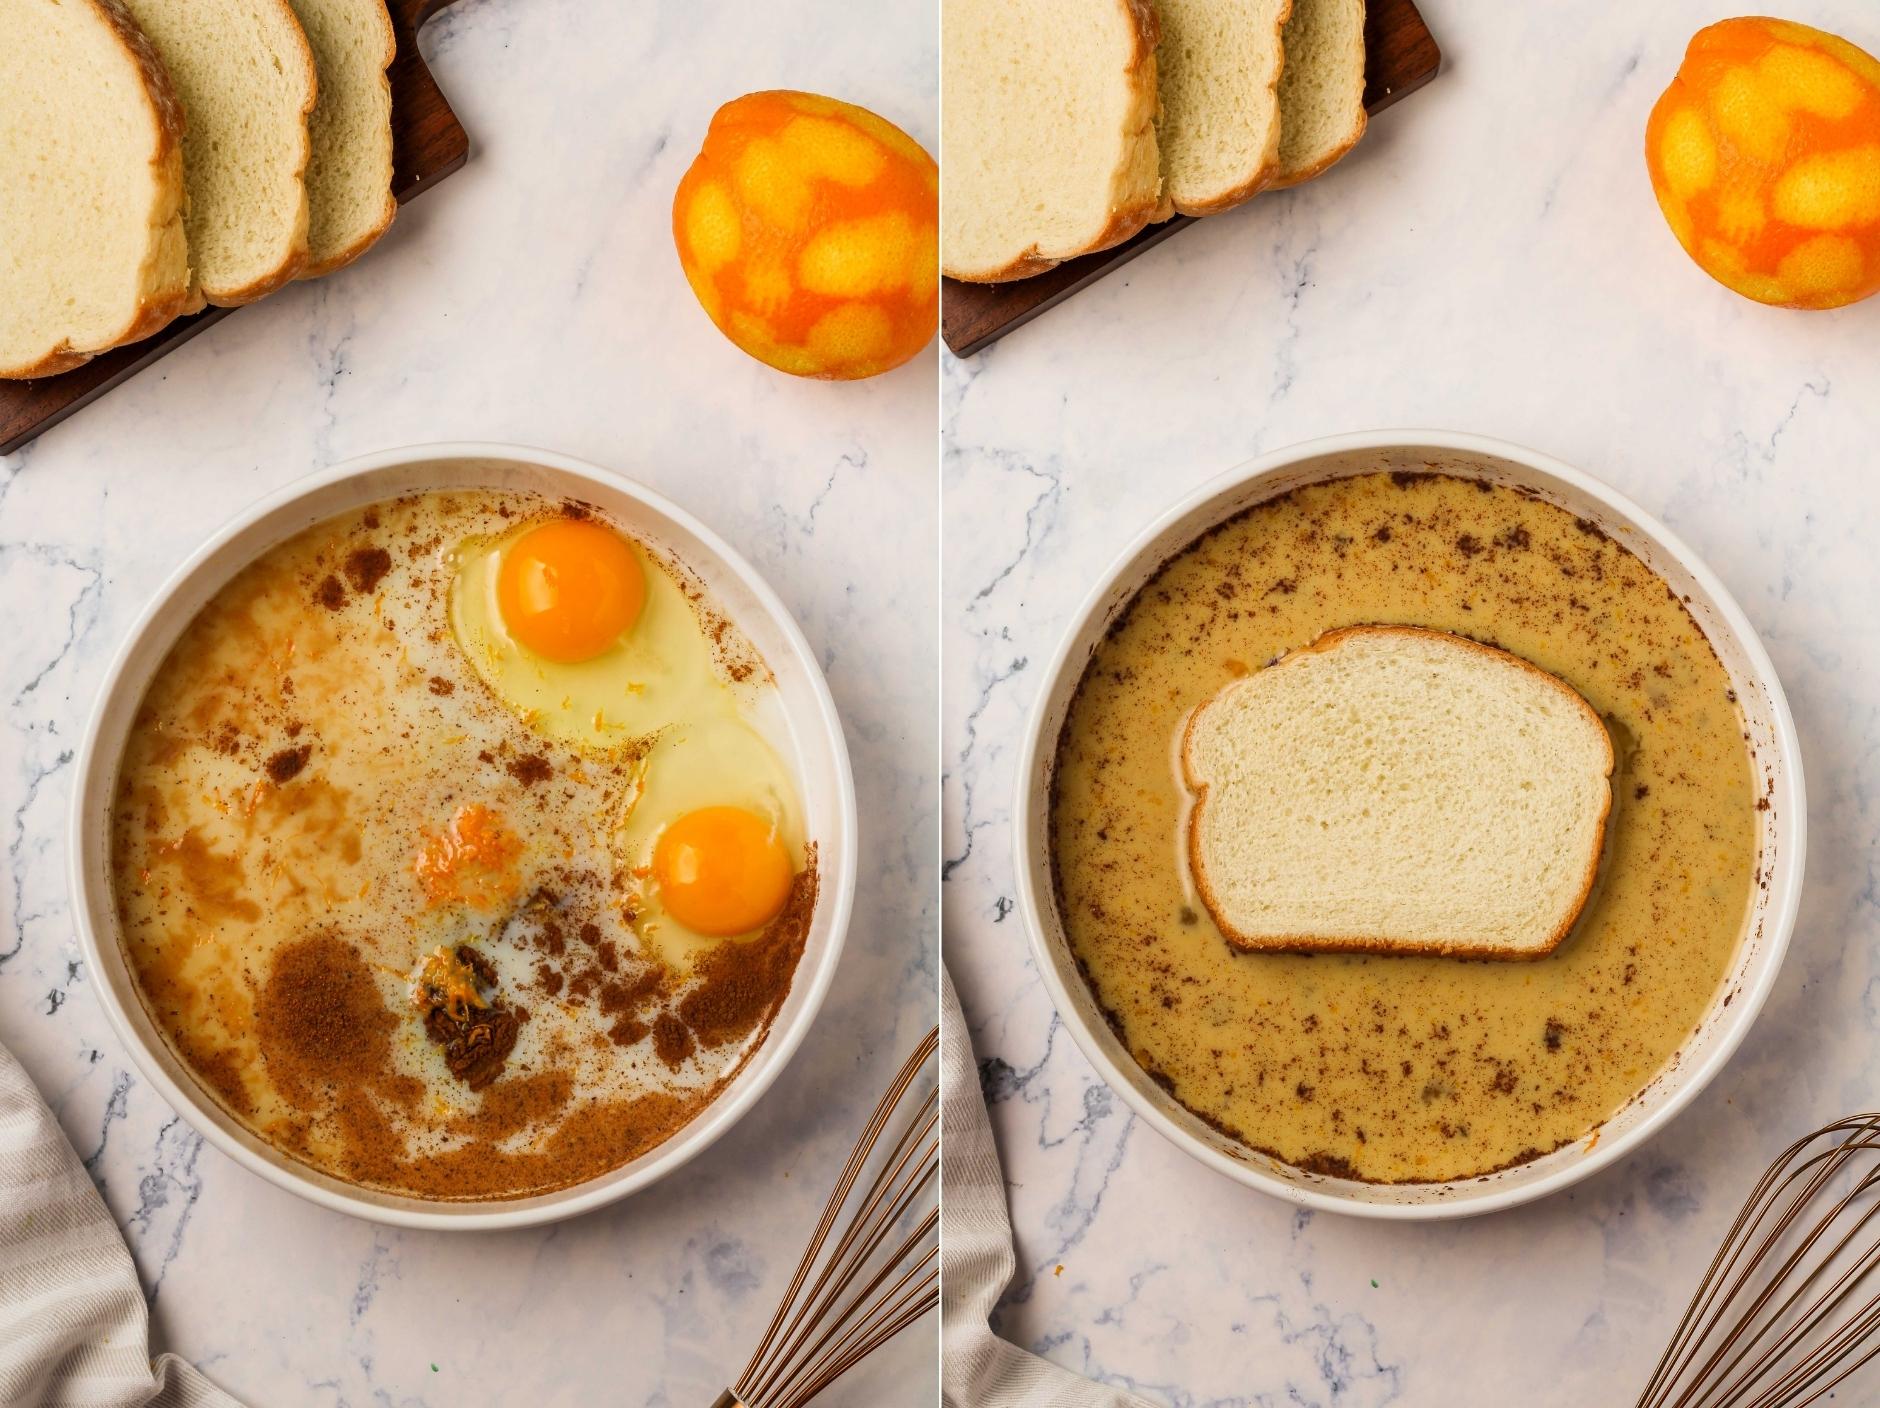 Egg custard mixture in bowl with bread